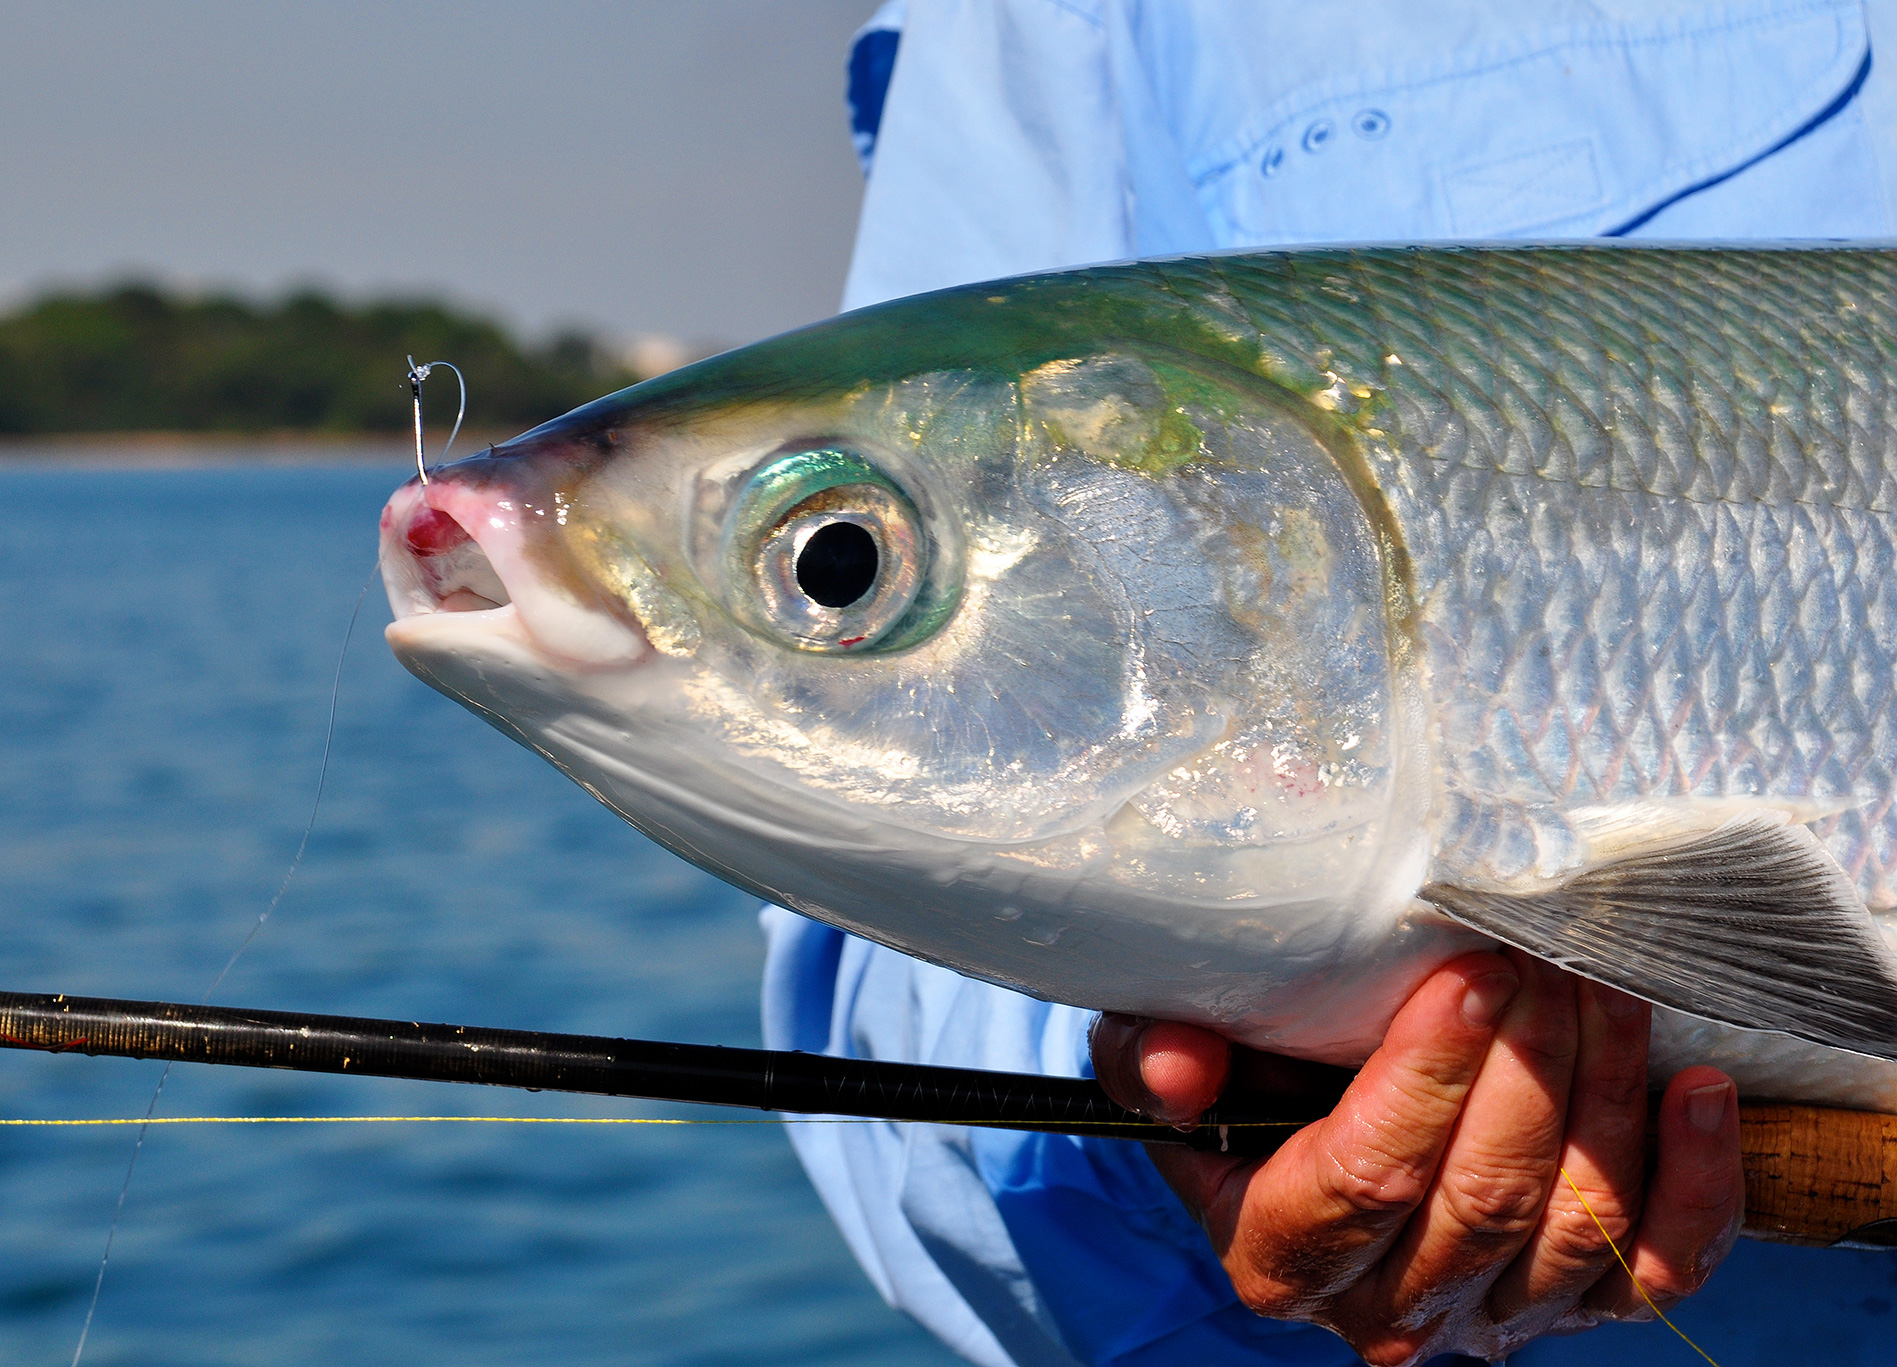 The mighty milkfish is a very worthy target!